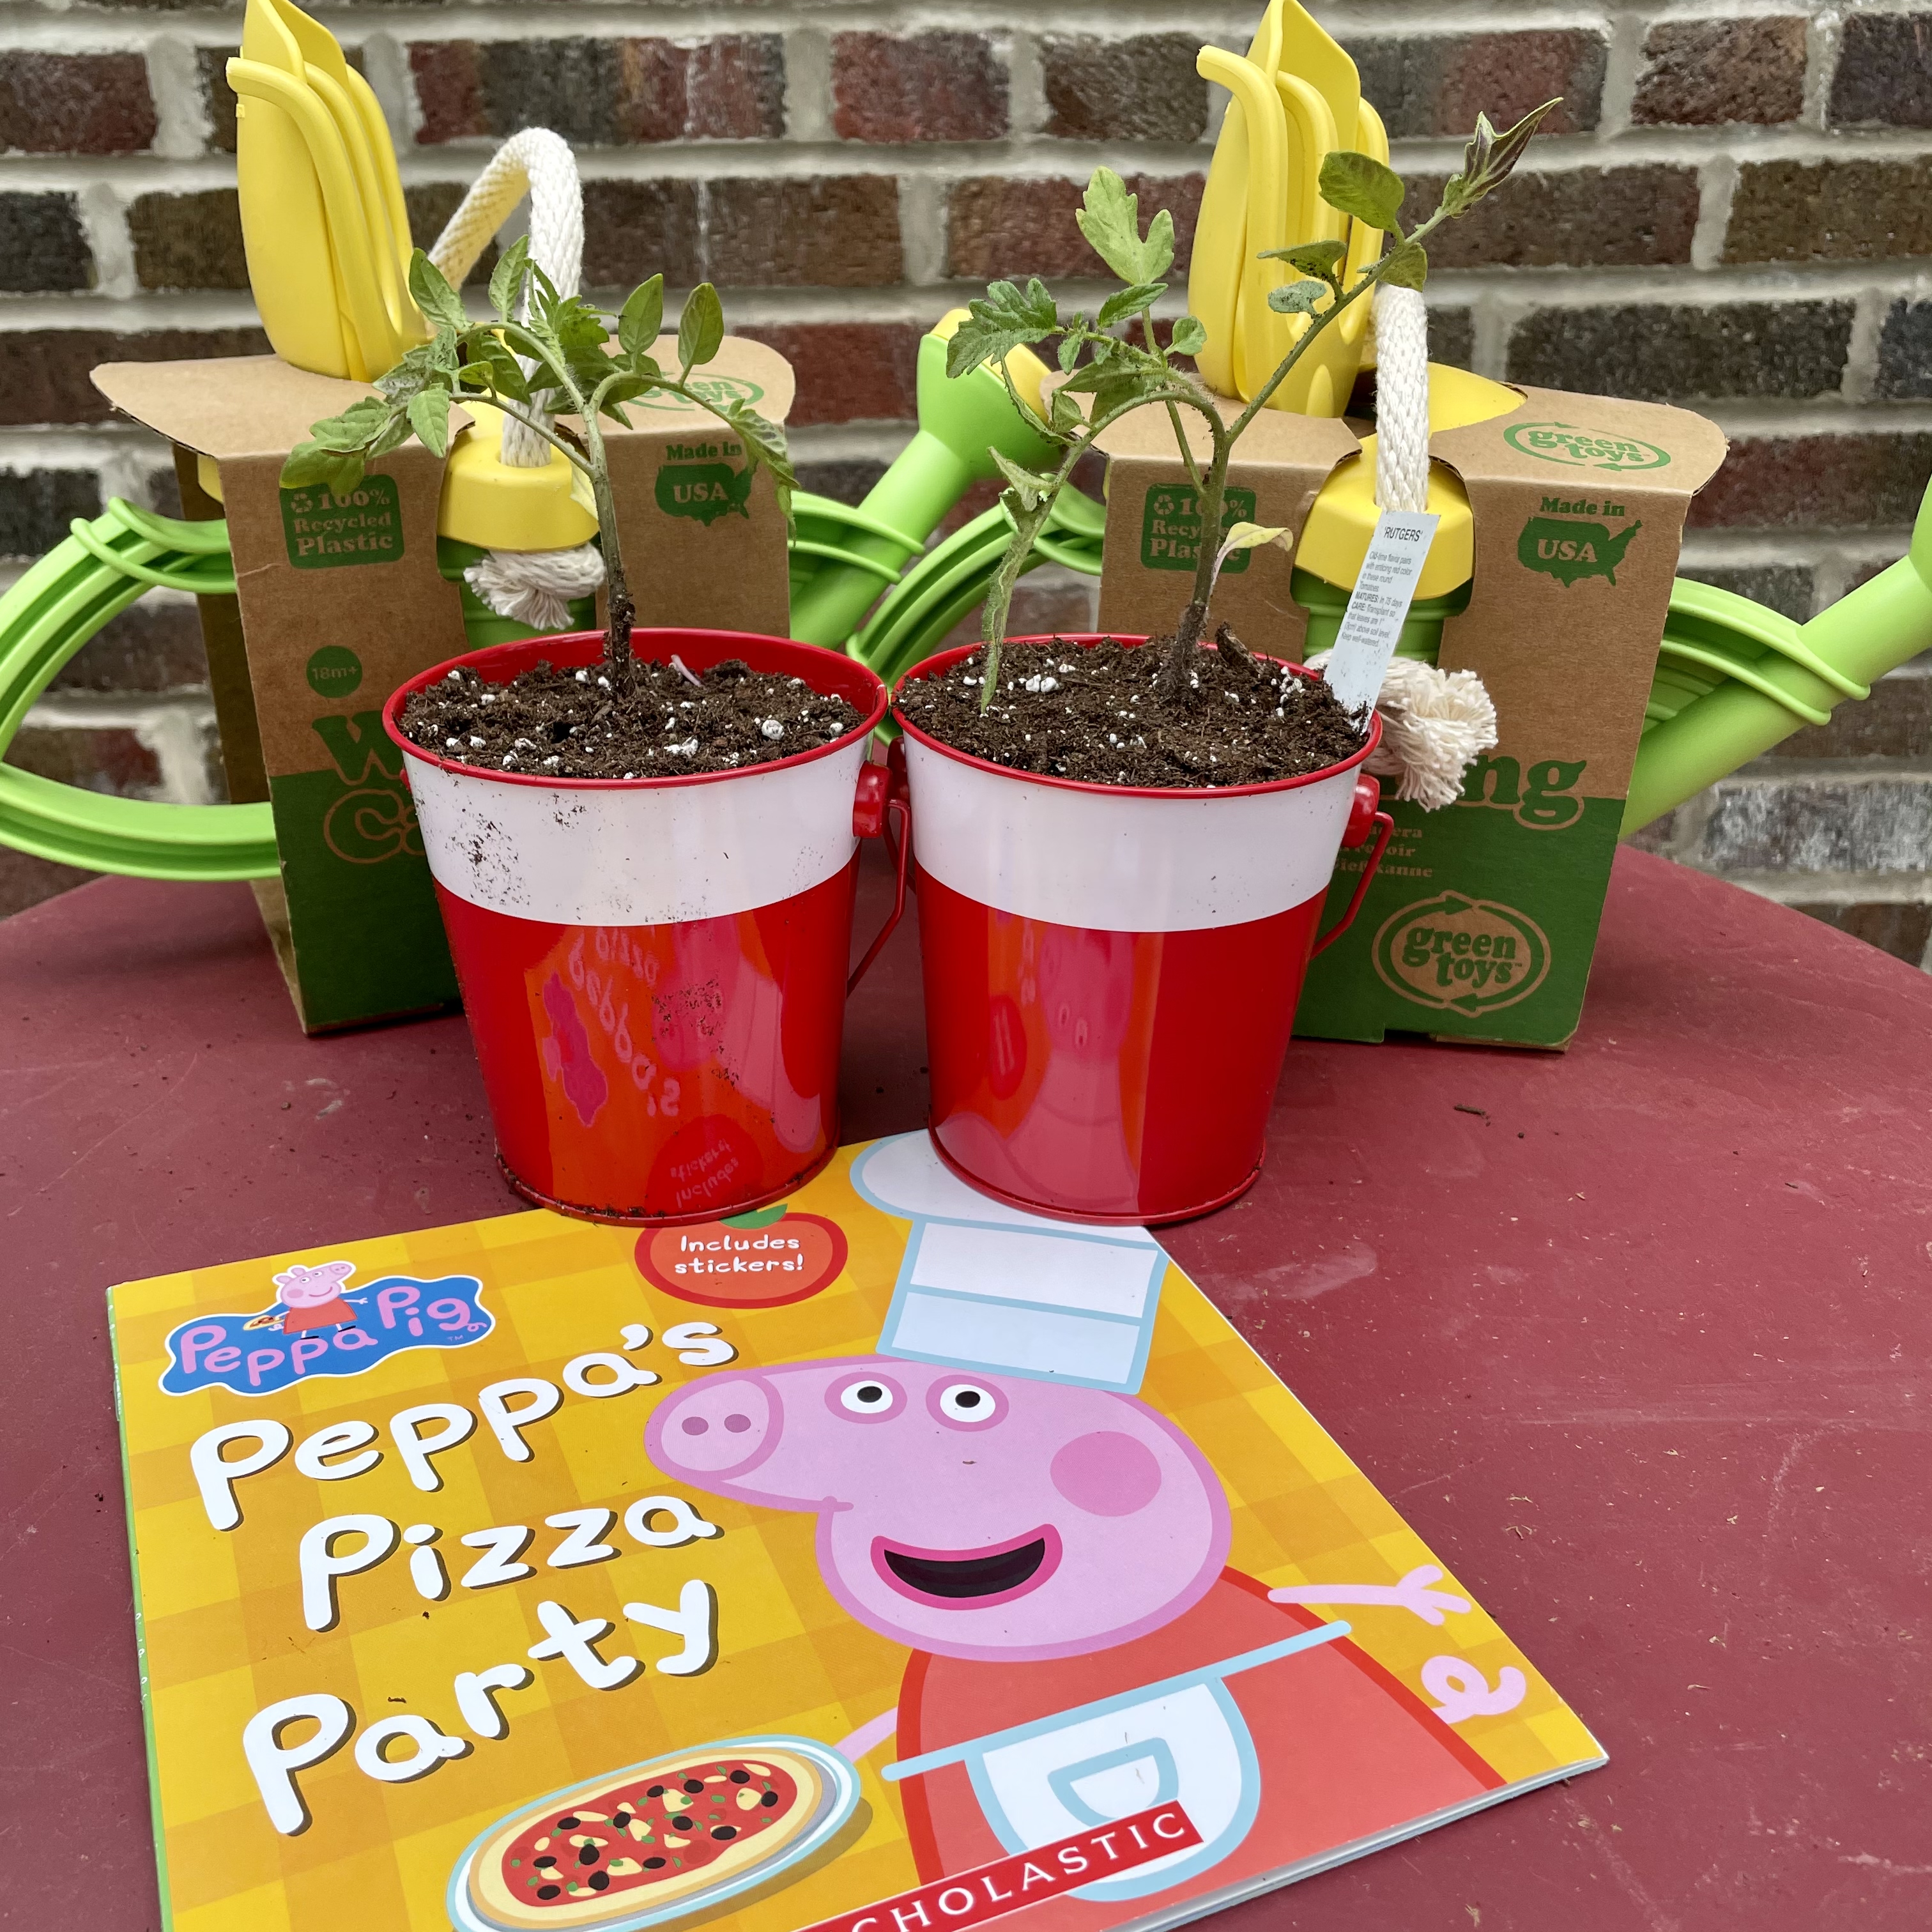 Two small tomato transplants sit next to the book "Peppa's Pizza Party"